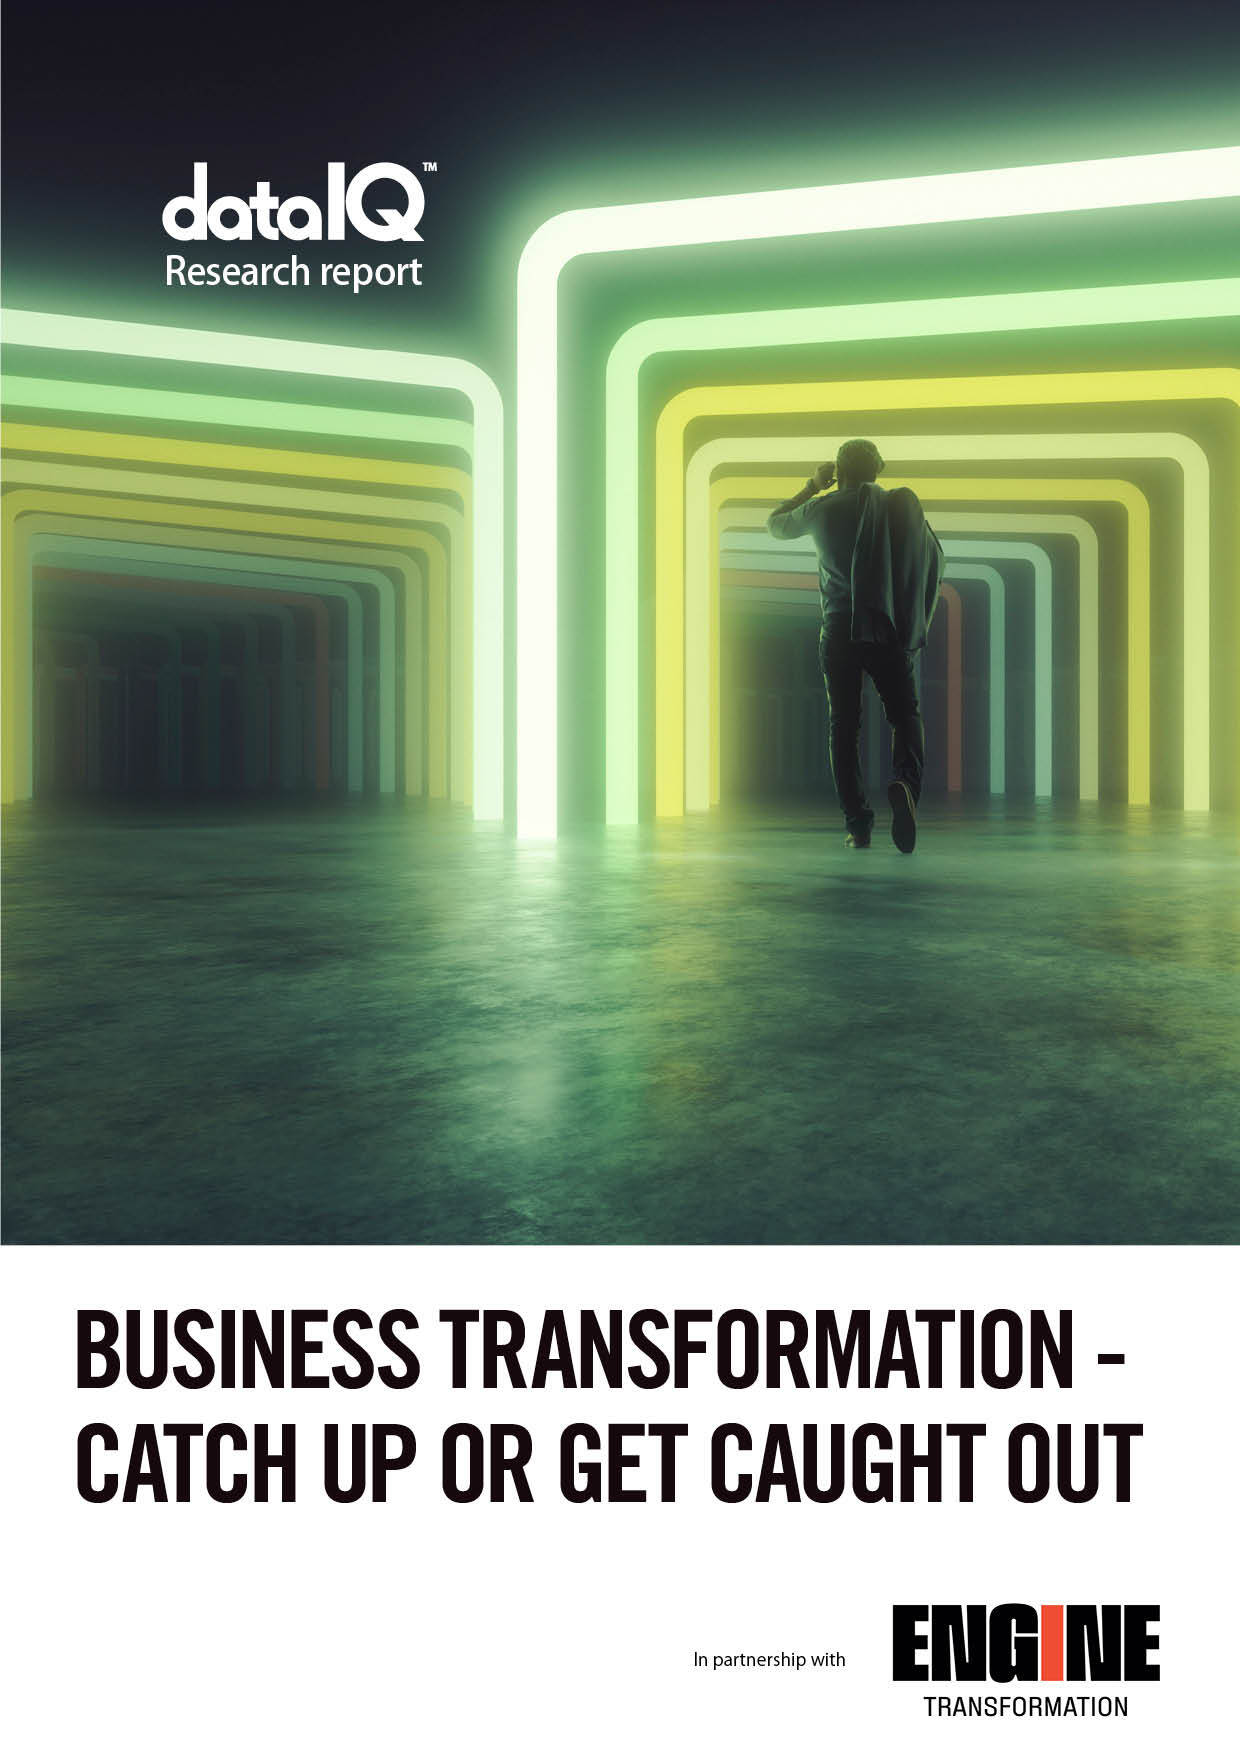 Business transformation - Catch up or get caught out